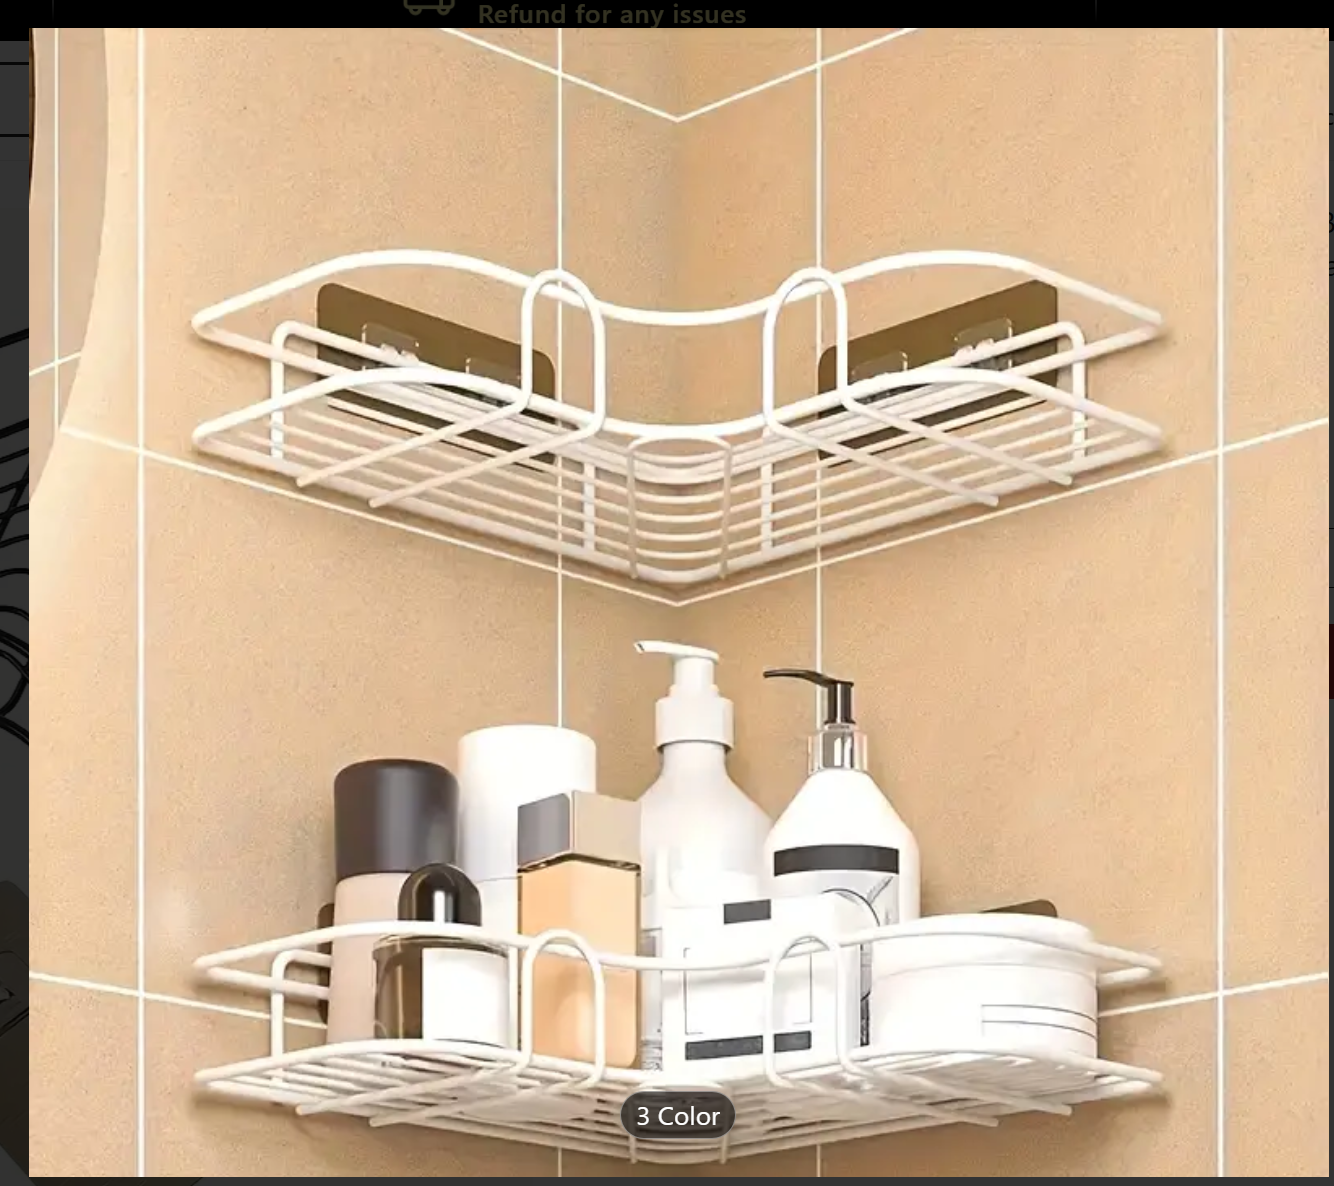 Triangle Brilliance: Stylish Wall Mounted Shower Caddy Rack for Effortless Bathroom and Kitchen Organization!